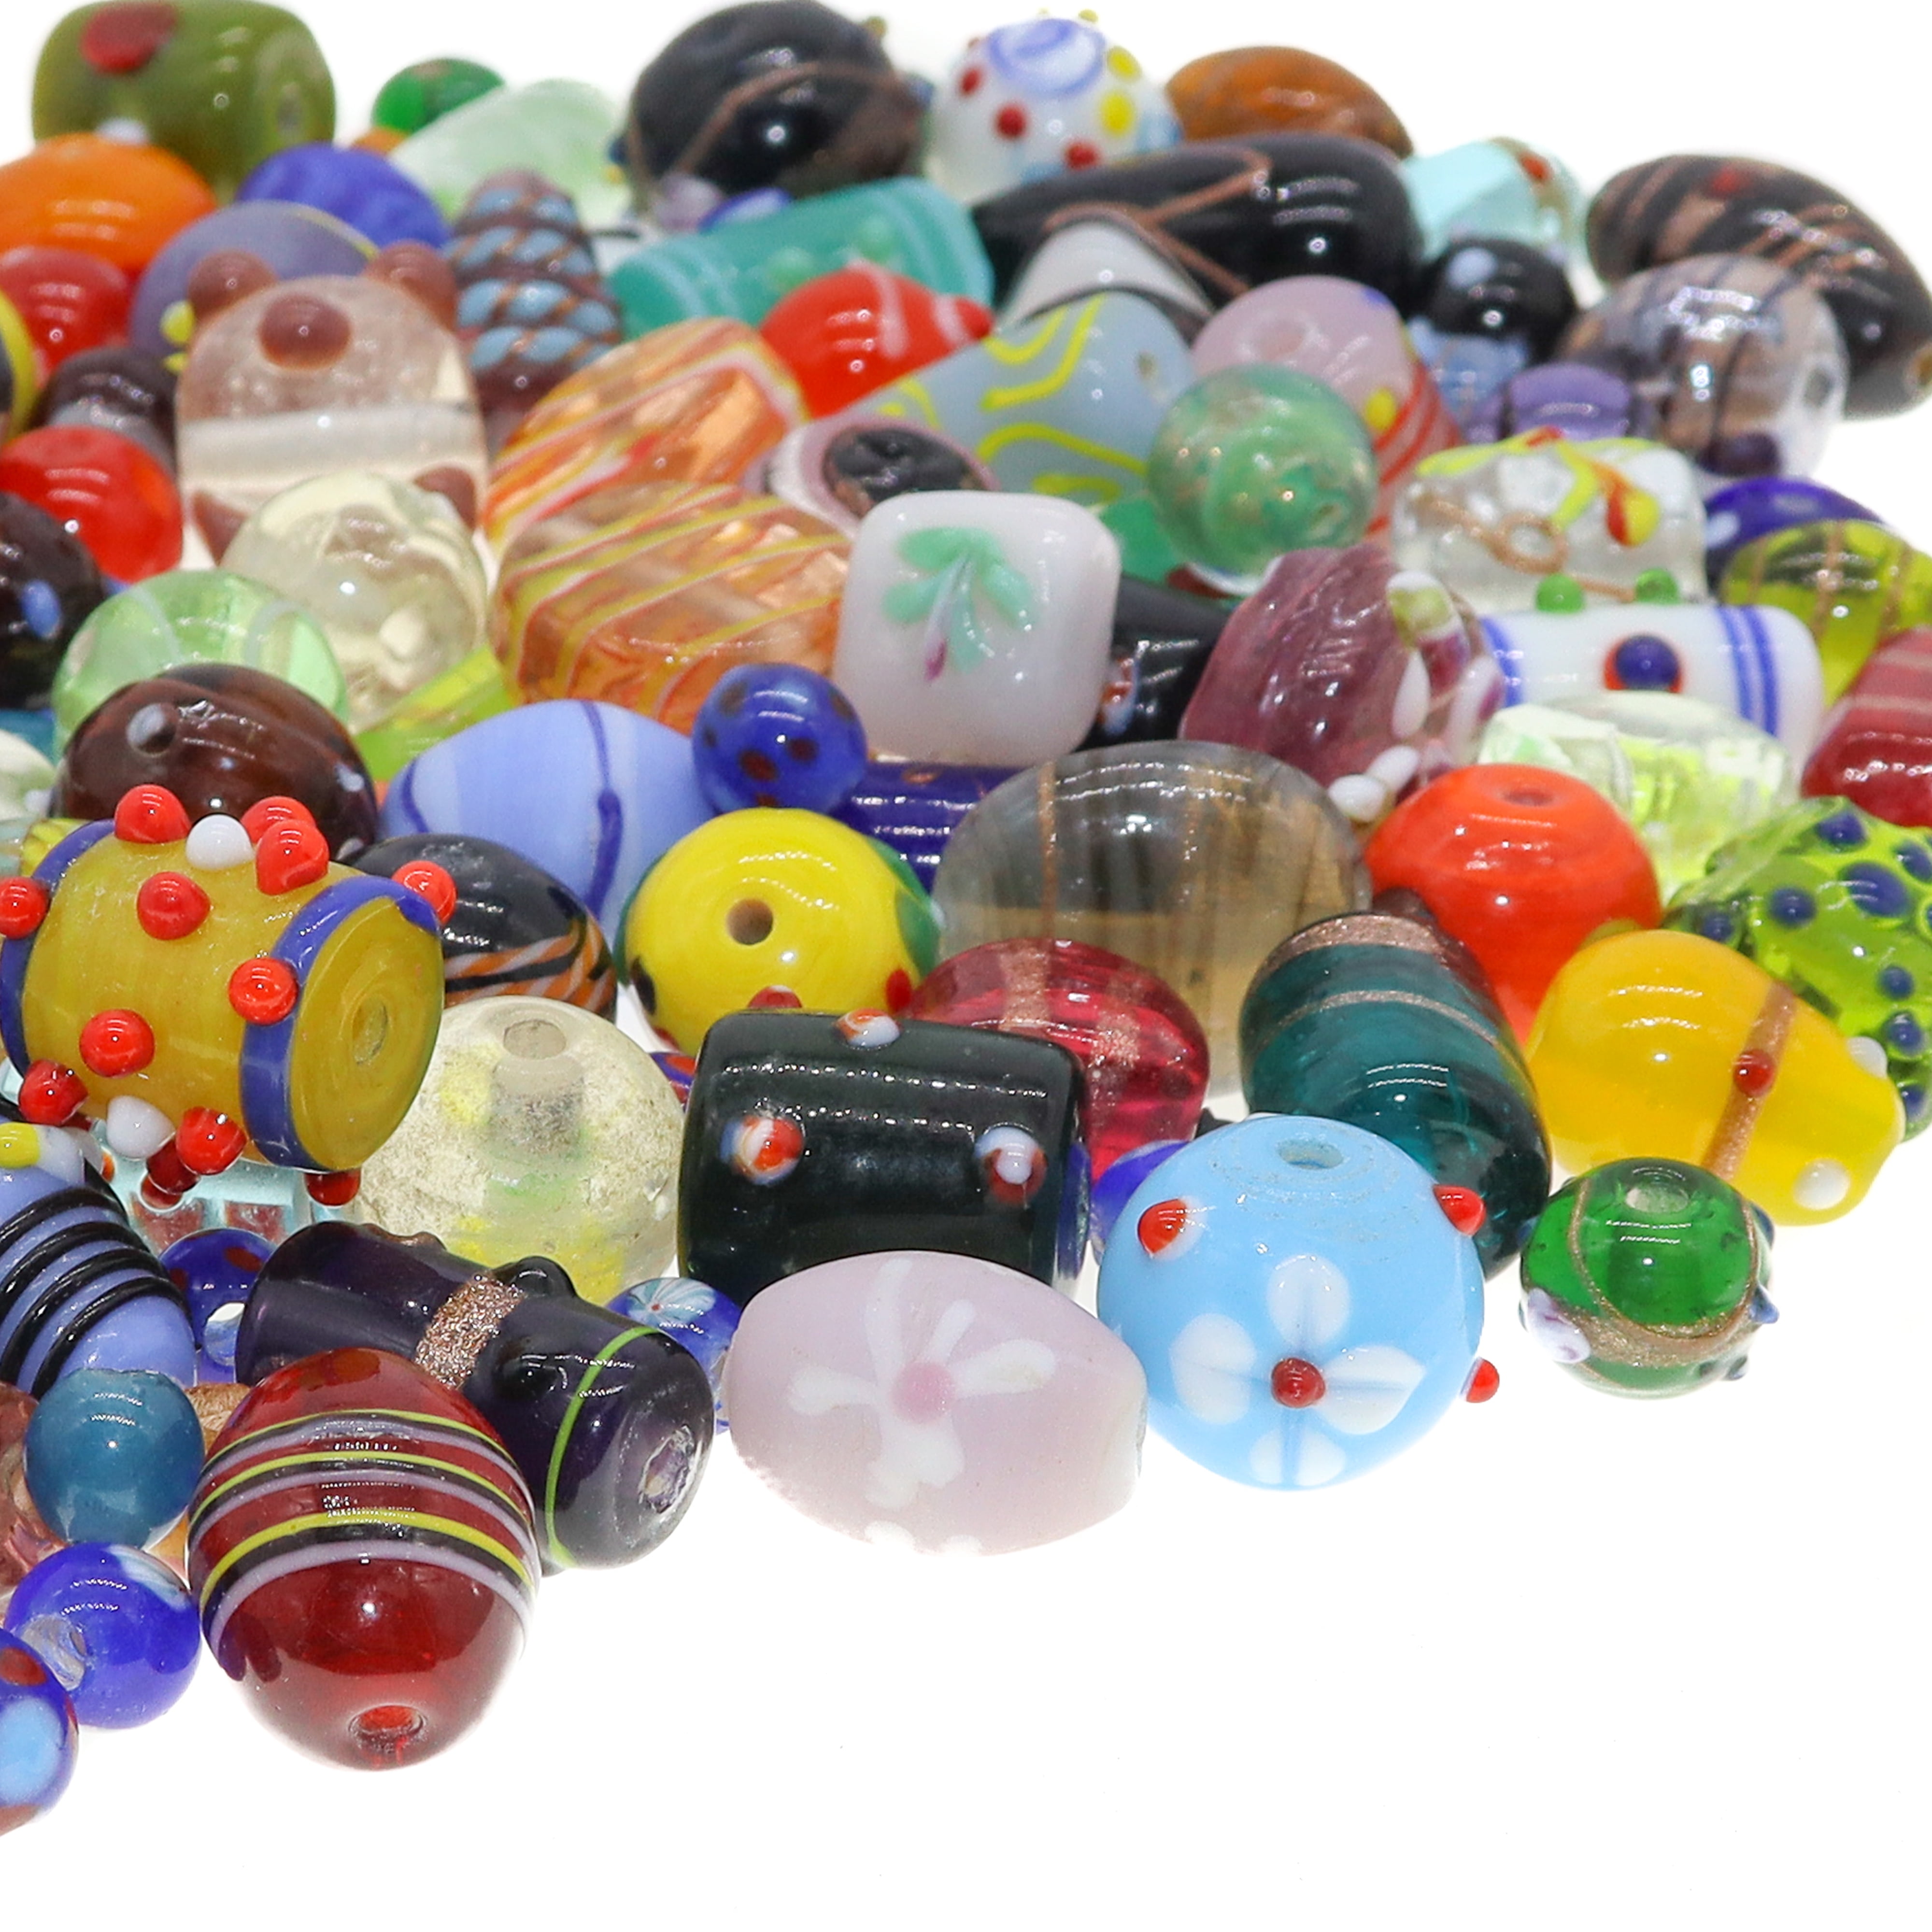 Glass Beads for Jewelry Making for Adults 60-80 Pieces ...